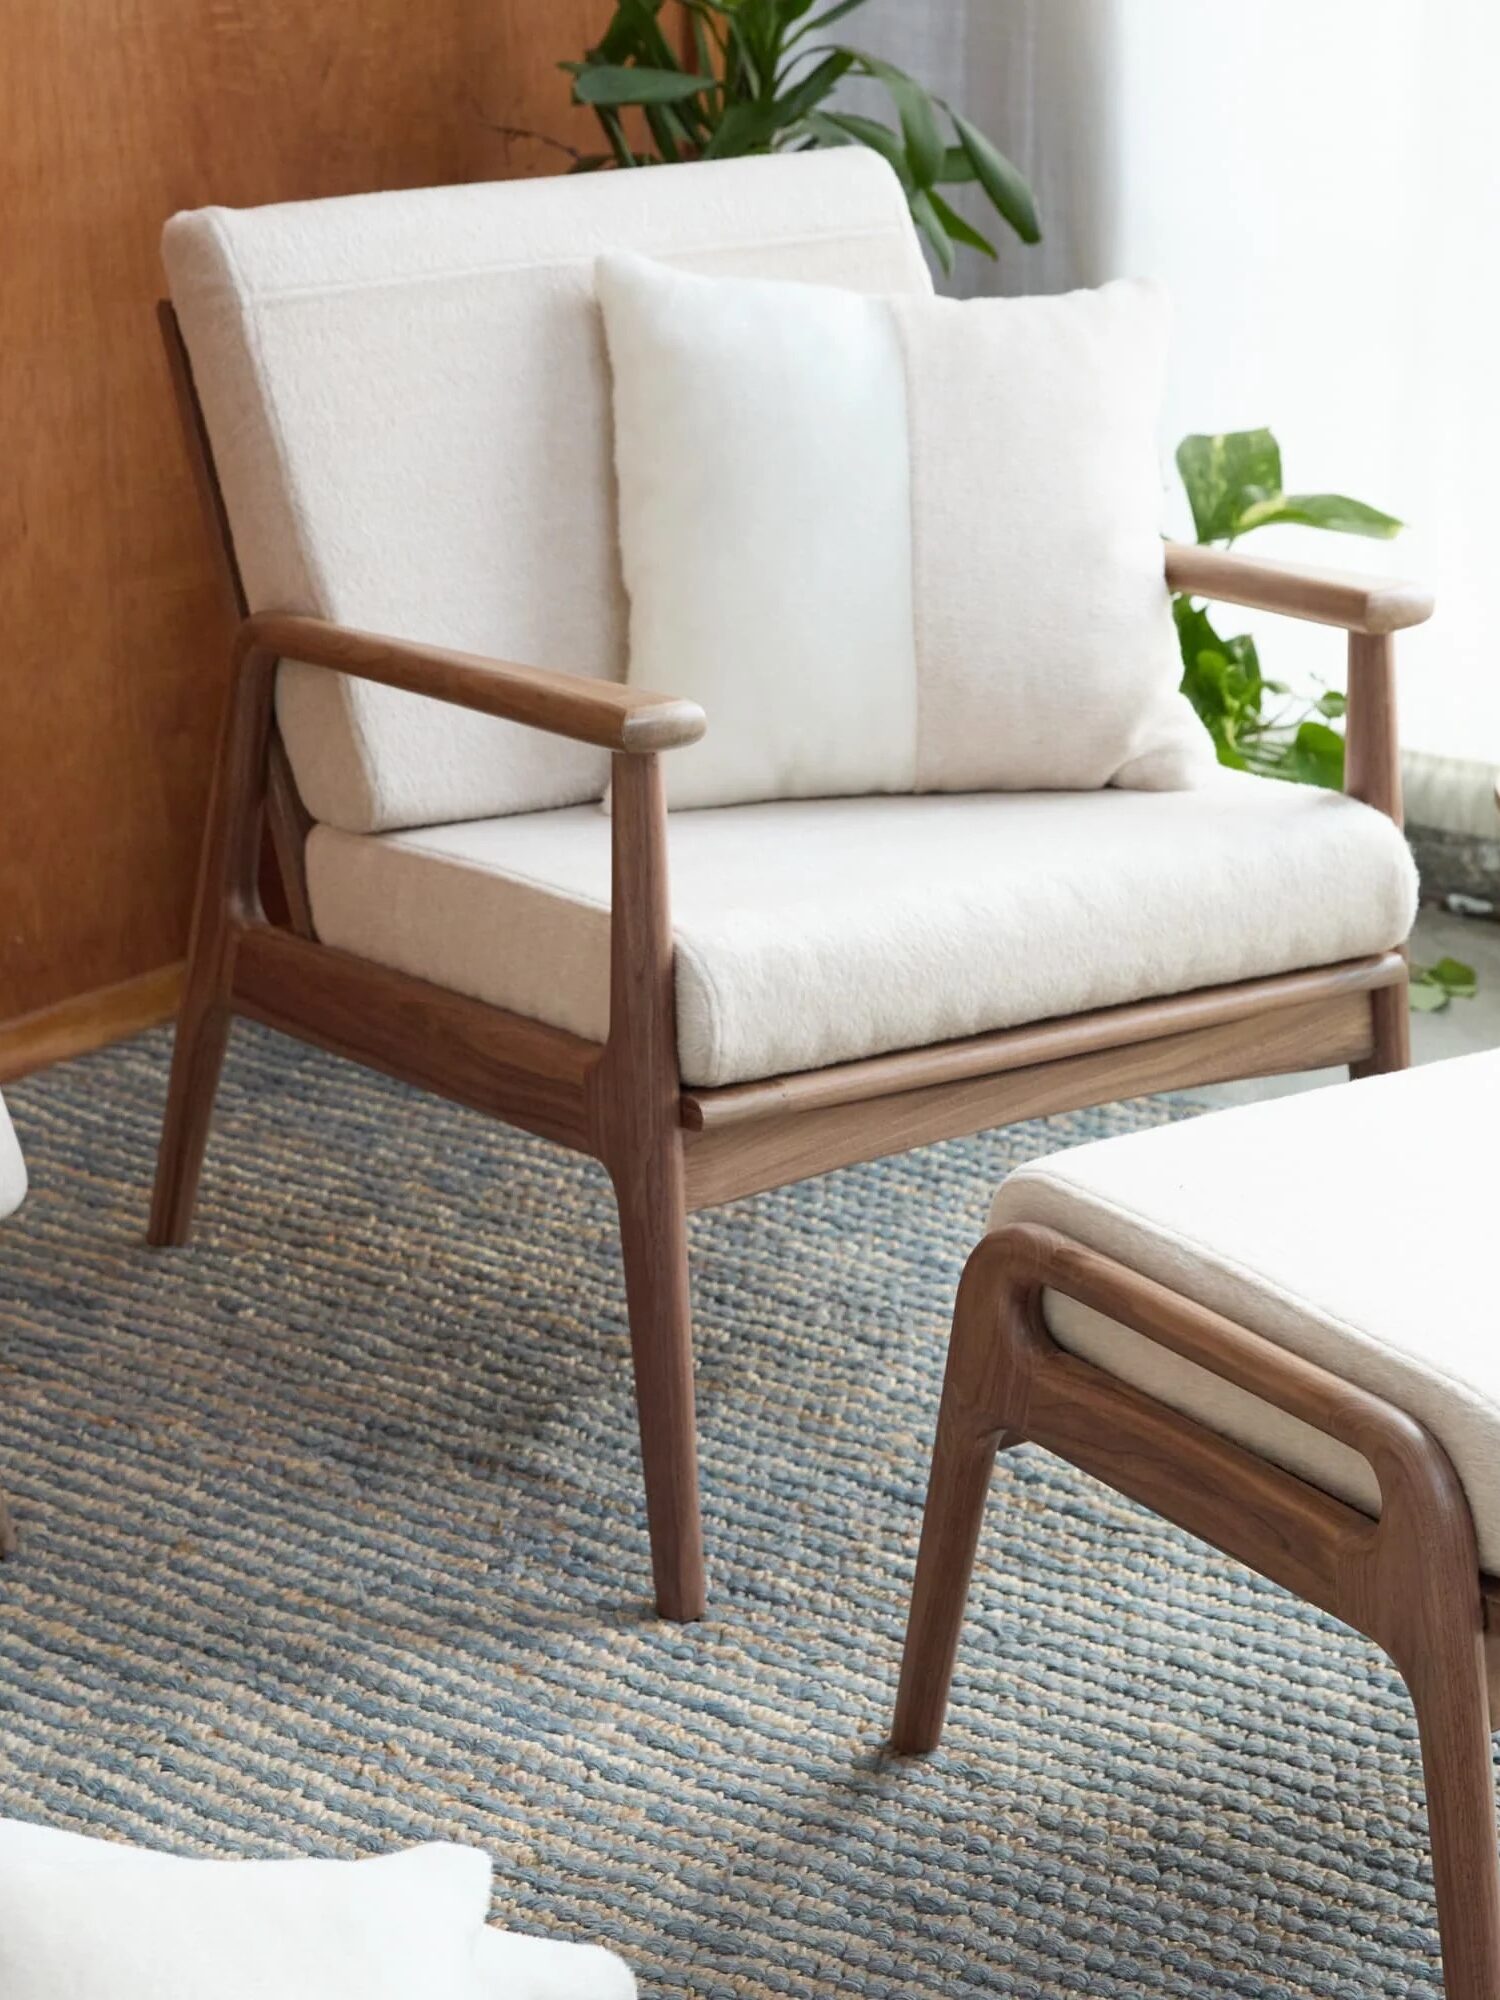 A wooden chair and matching ottoman with white cushions sit on a woven rug next to a small round side table holding a glass, near a window with white curtains and a wooden wall.